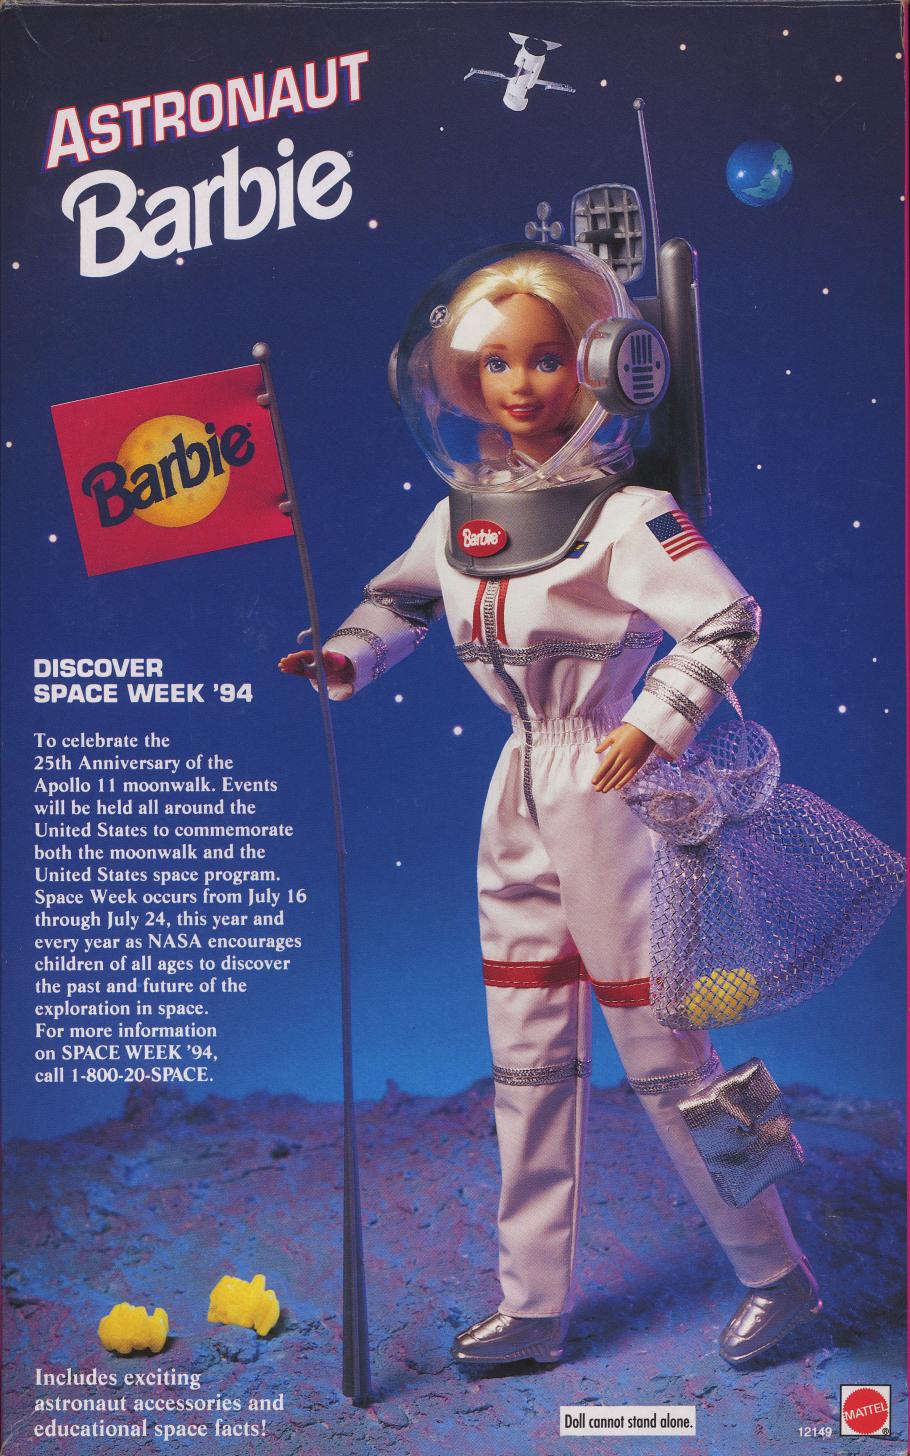 Barbie: An Astronaut for the Ages | National Air and Space